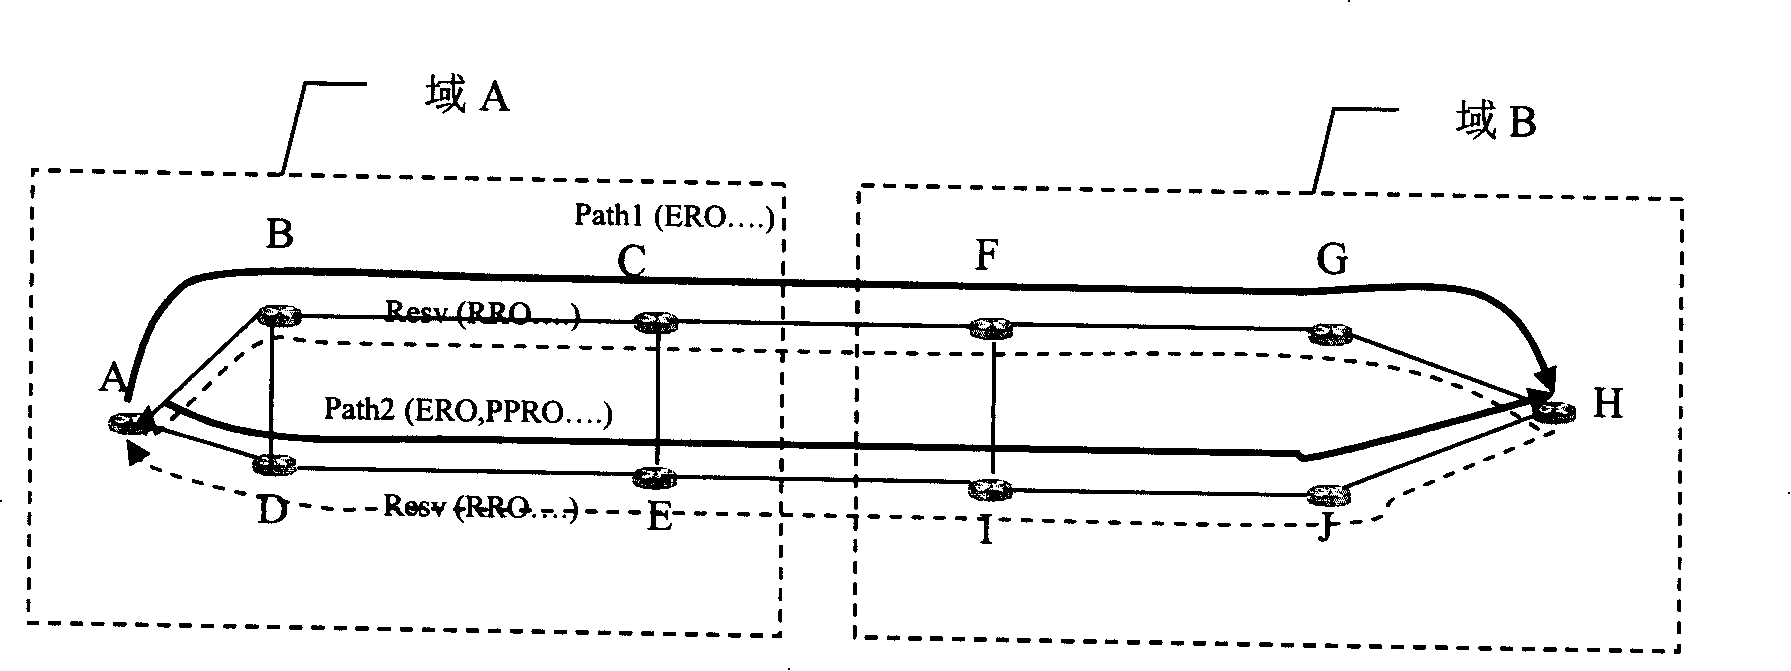 Method for implementing shared risk link circuit group separation crossing field path